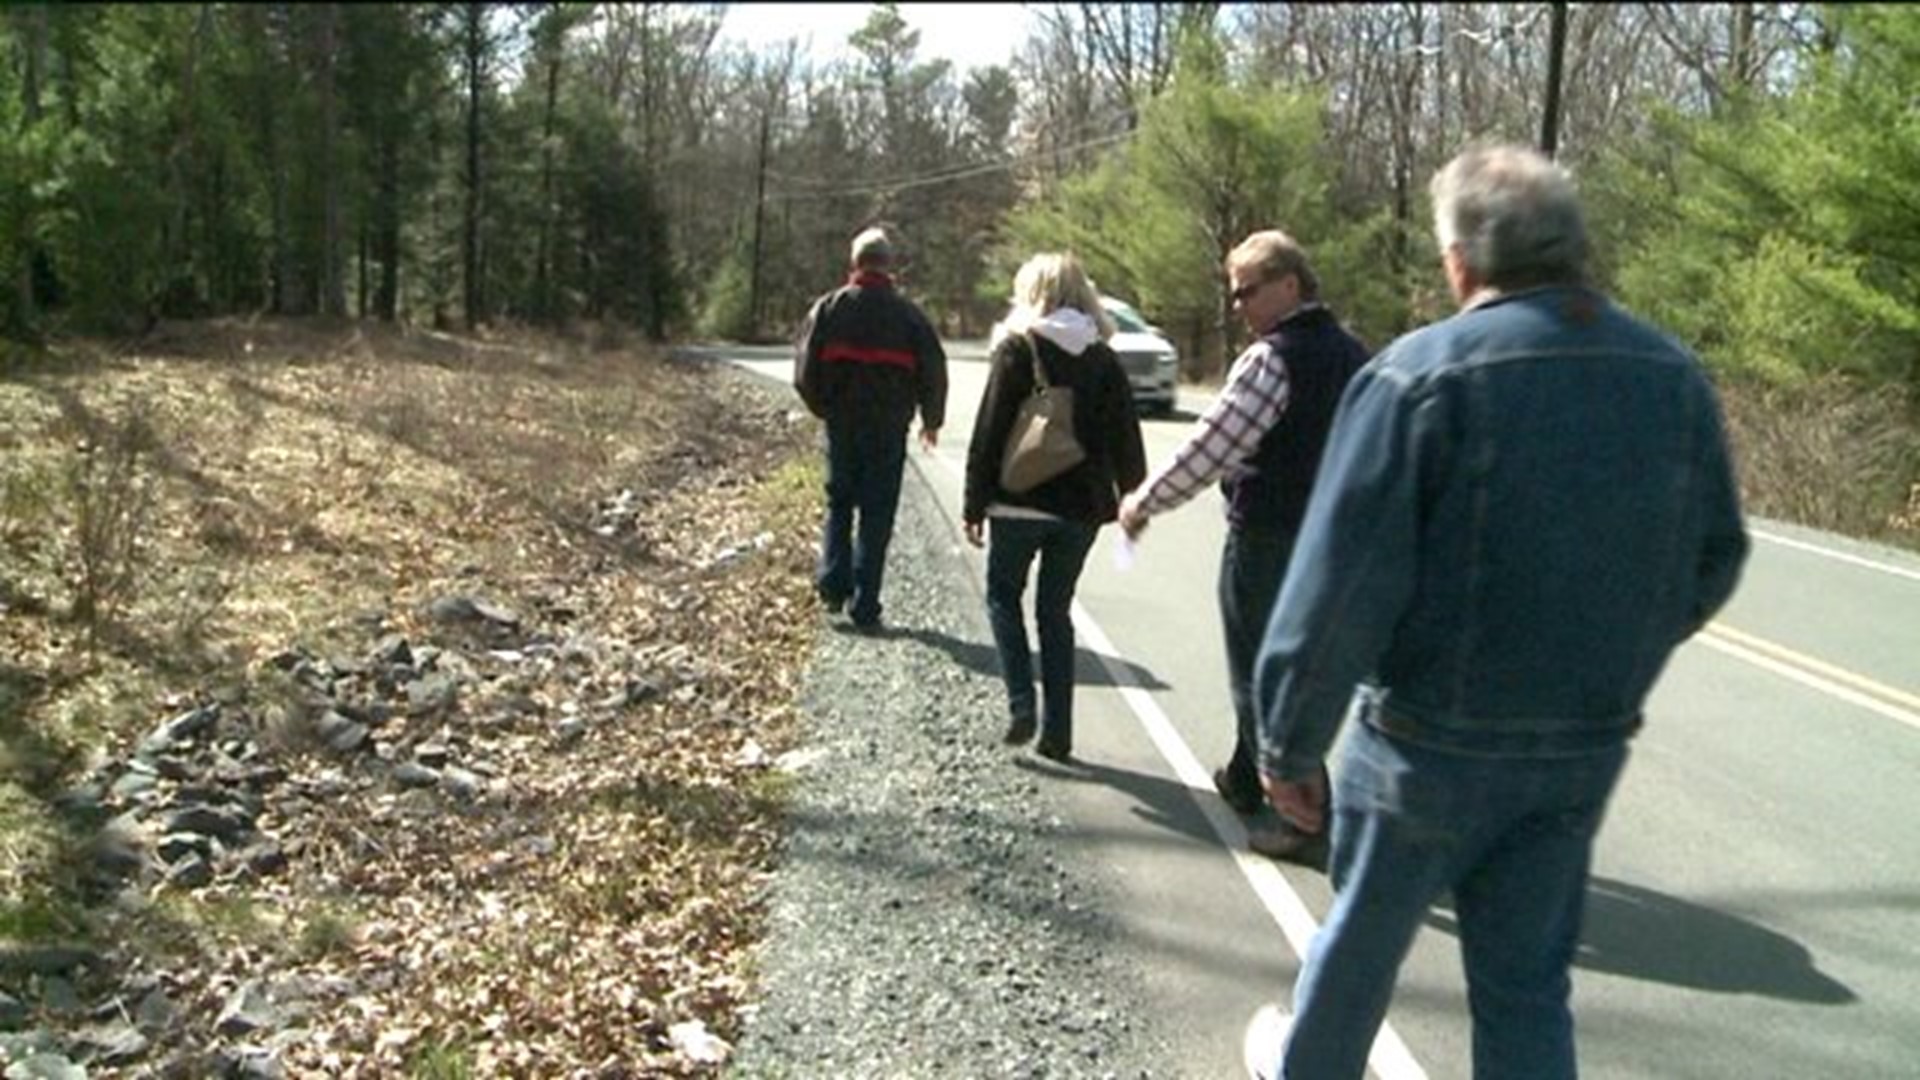 Residents are Fed Up With Roadside Trash